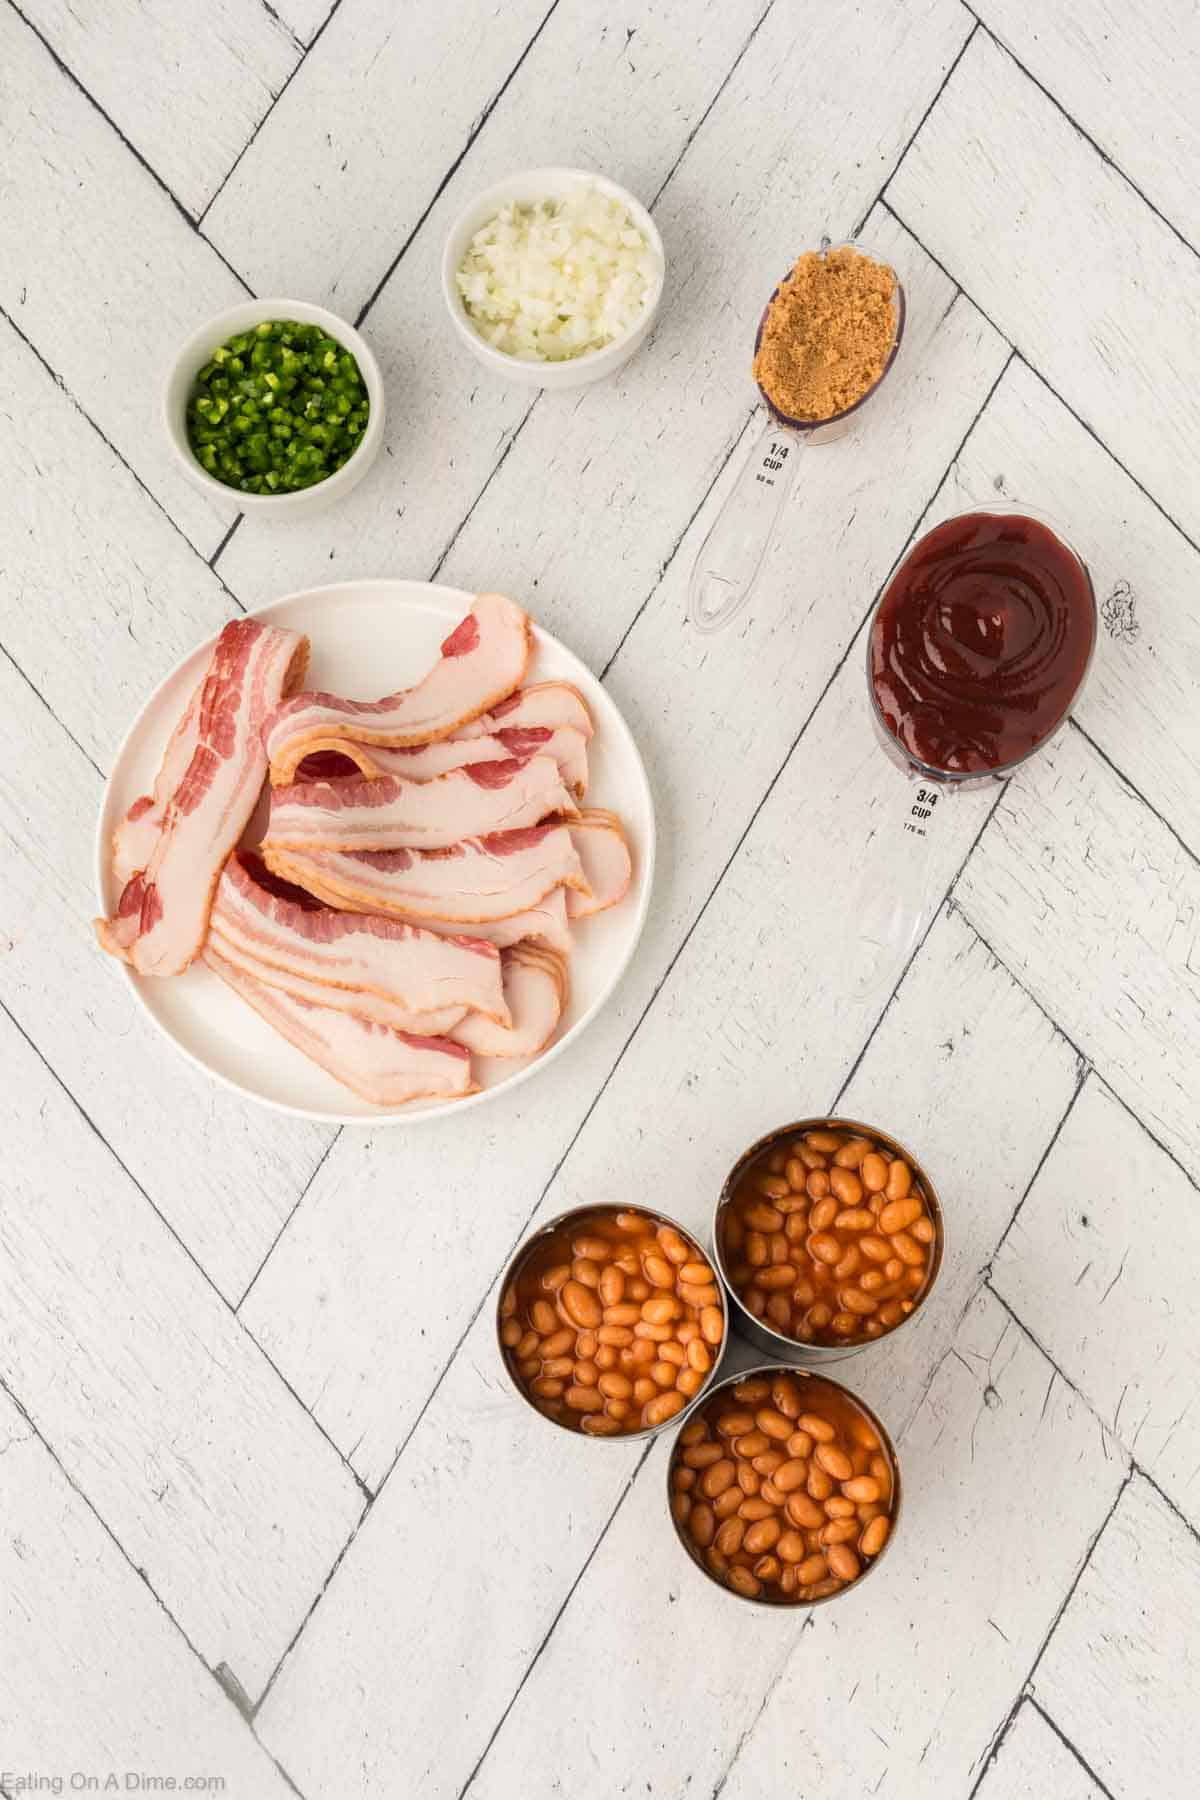 Baked Beans Ingredients - pork and beans, BBQ Sauce, brown sugar, jalapeno, diced onions, bacon